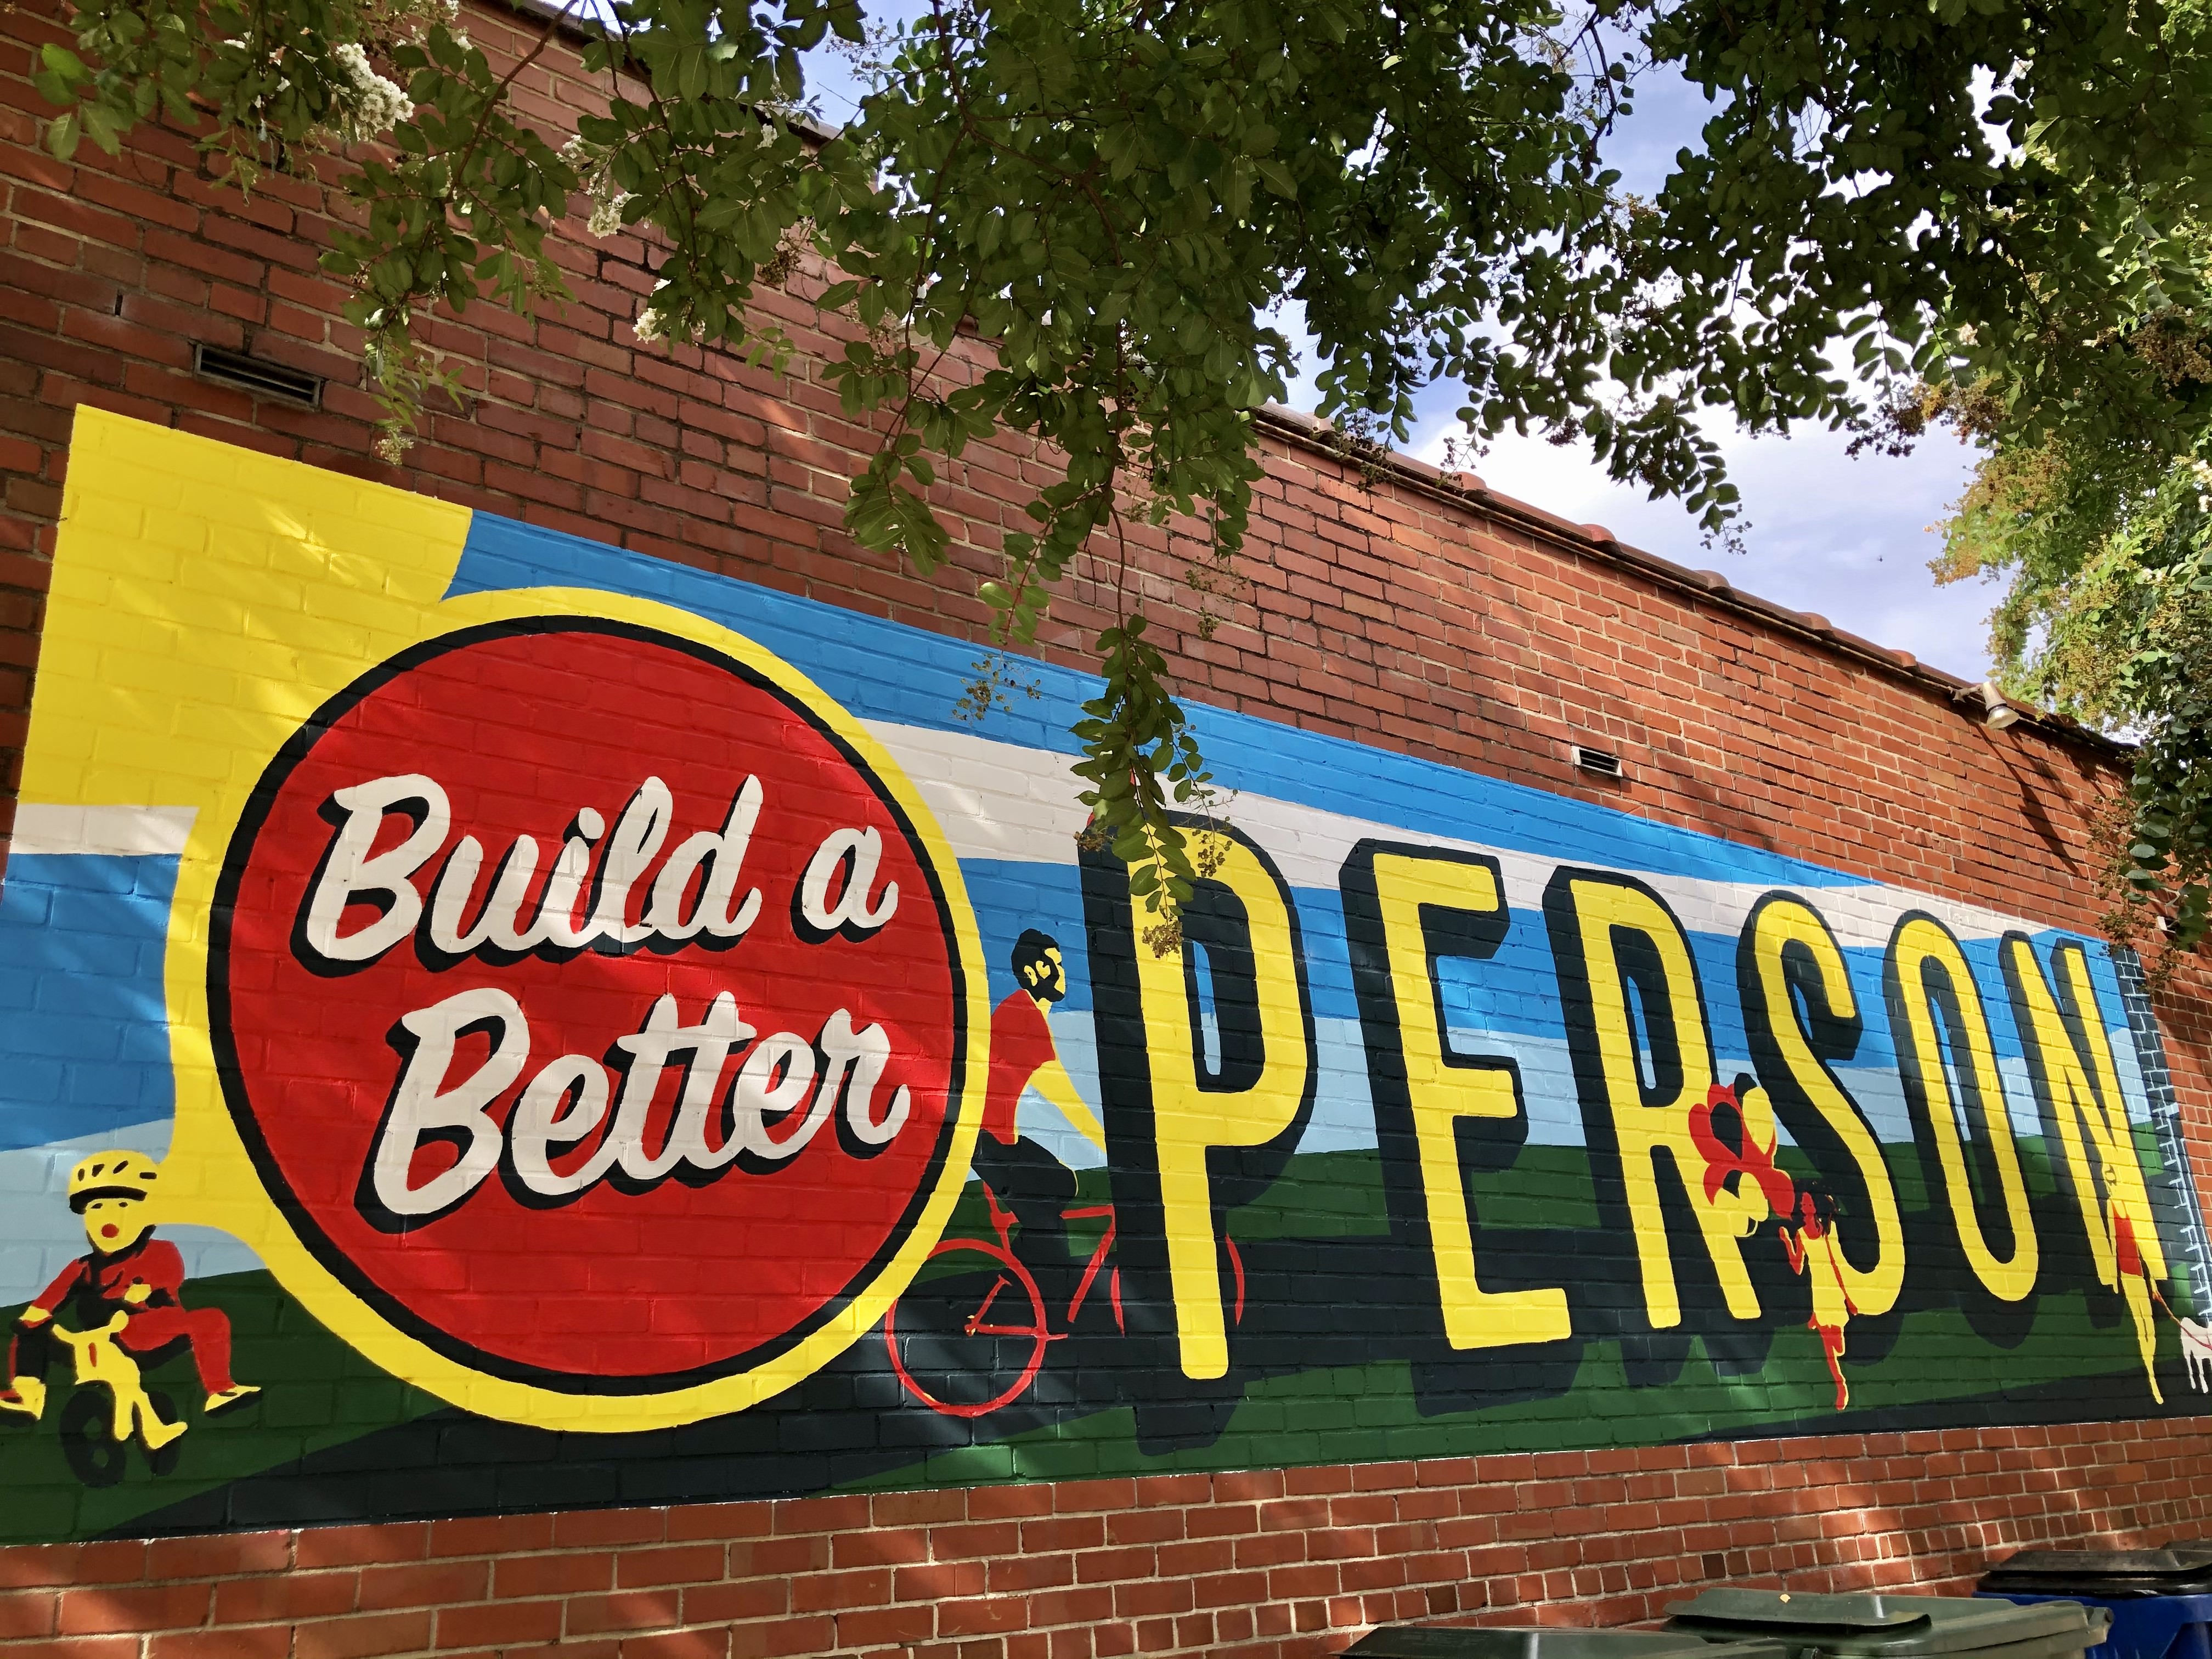 Build A Better Person Street